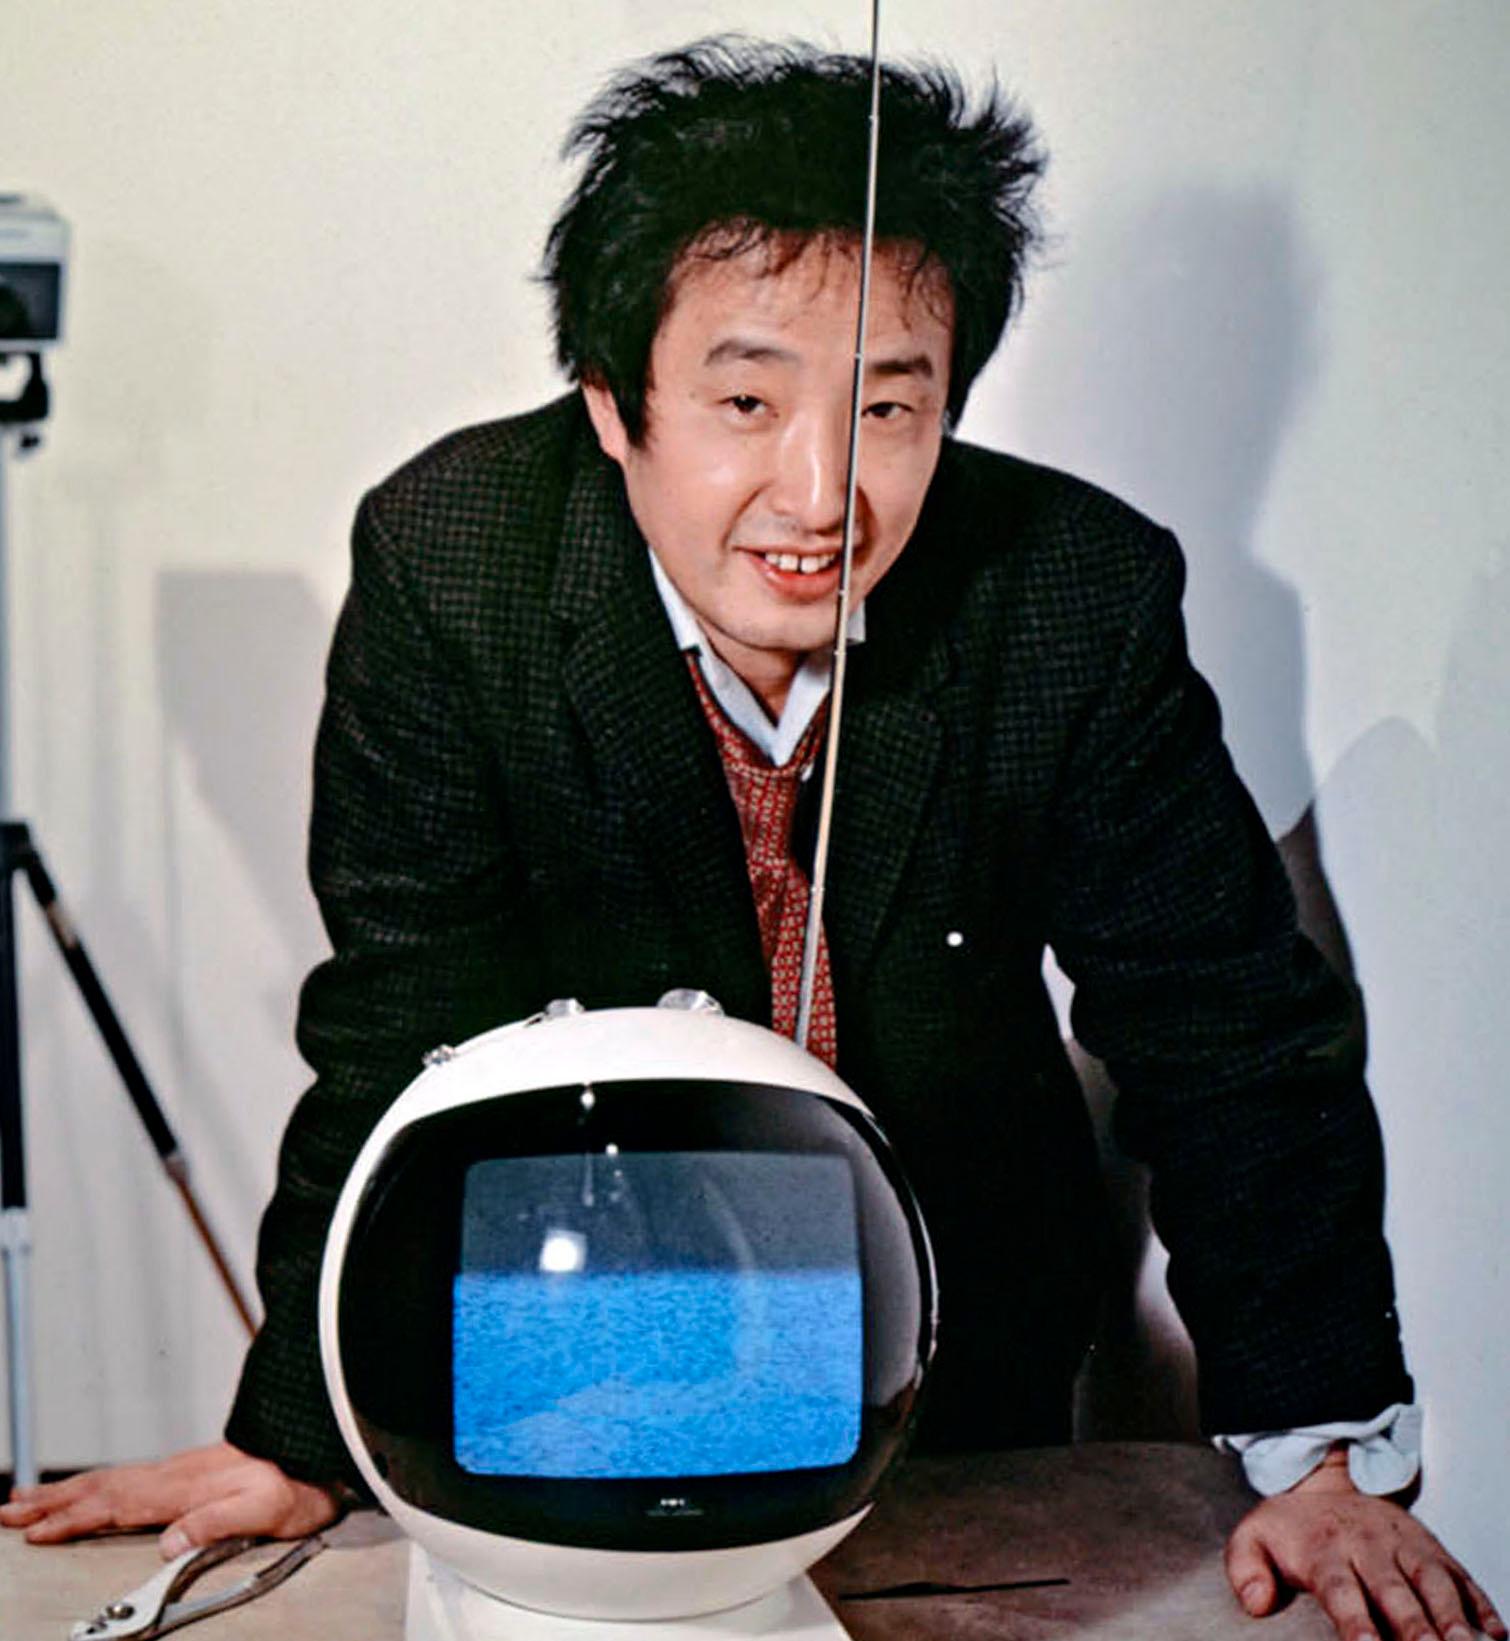  Video artist Nam June Paik photographed with his latest multimedia work. - Photograph by Jack Mitchell